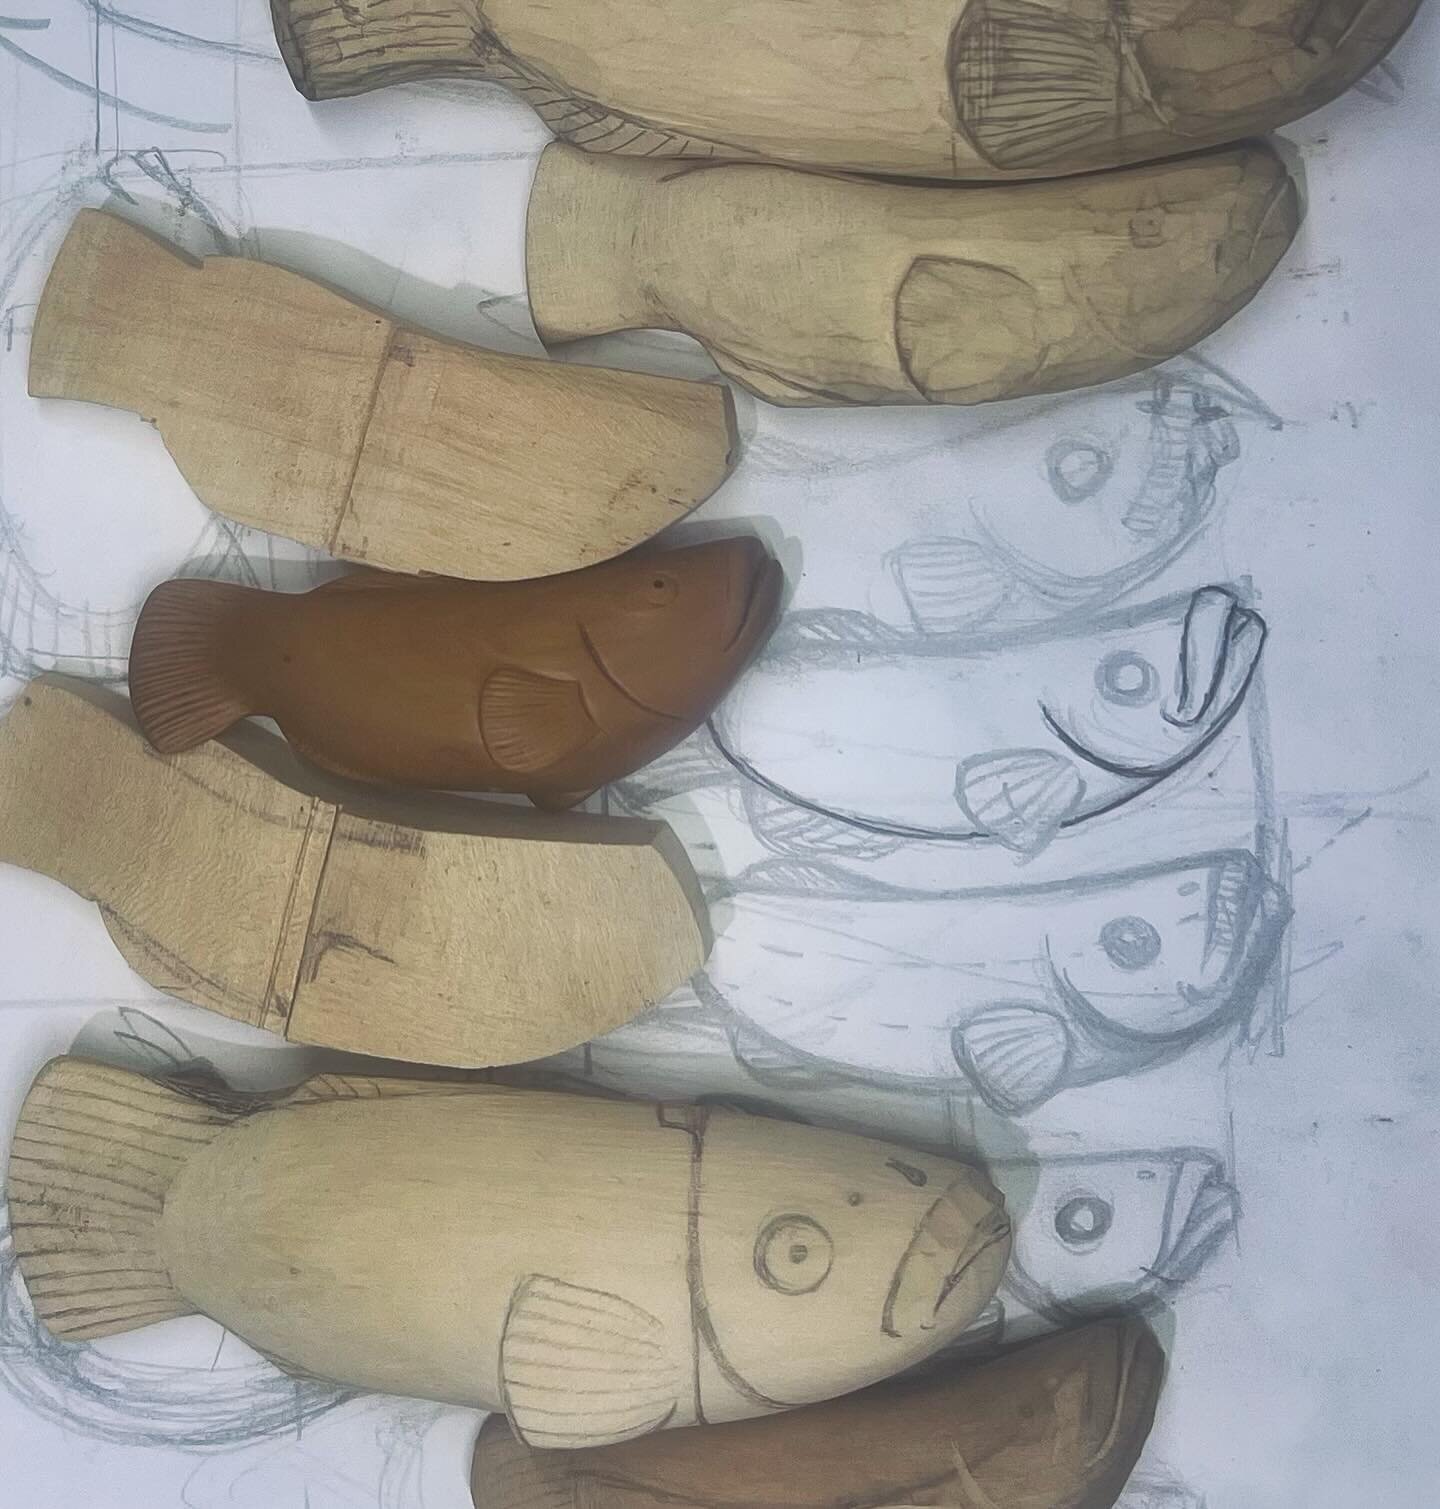 There's some fishy business getting around this studio. The scale of it has me a bit concerned.... but I'm not gillable as these fish might think....
Yup, too many dad jokes.
#woodcarving #fish #dadjokesarebad